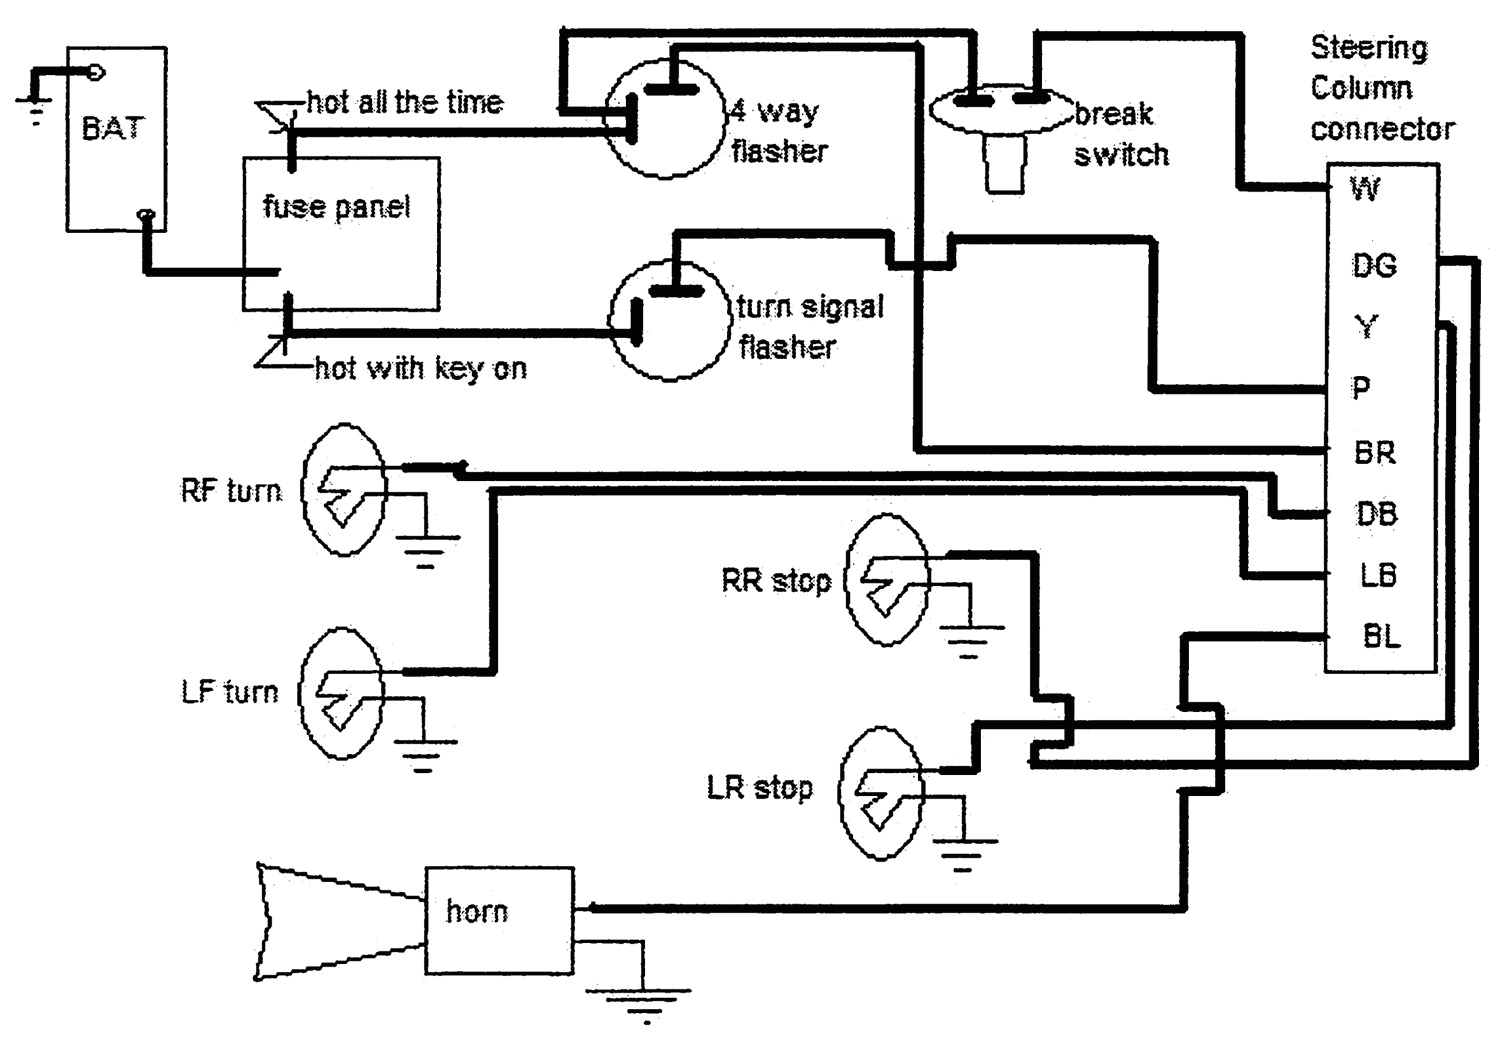 gm steering column wiring schematic if you need to change this connector for any reason the following schematic will be helpful for further explanation click here to watch our informative 9f jpg